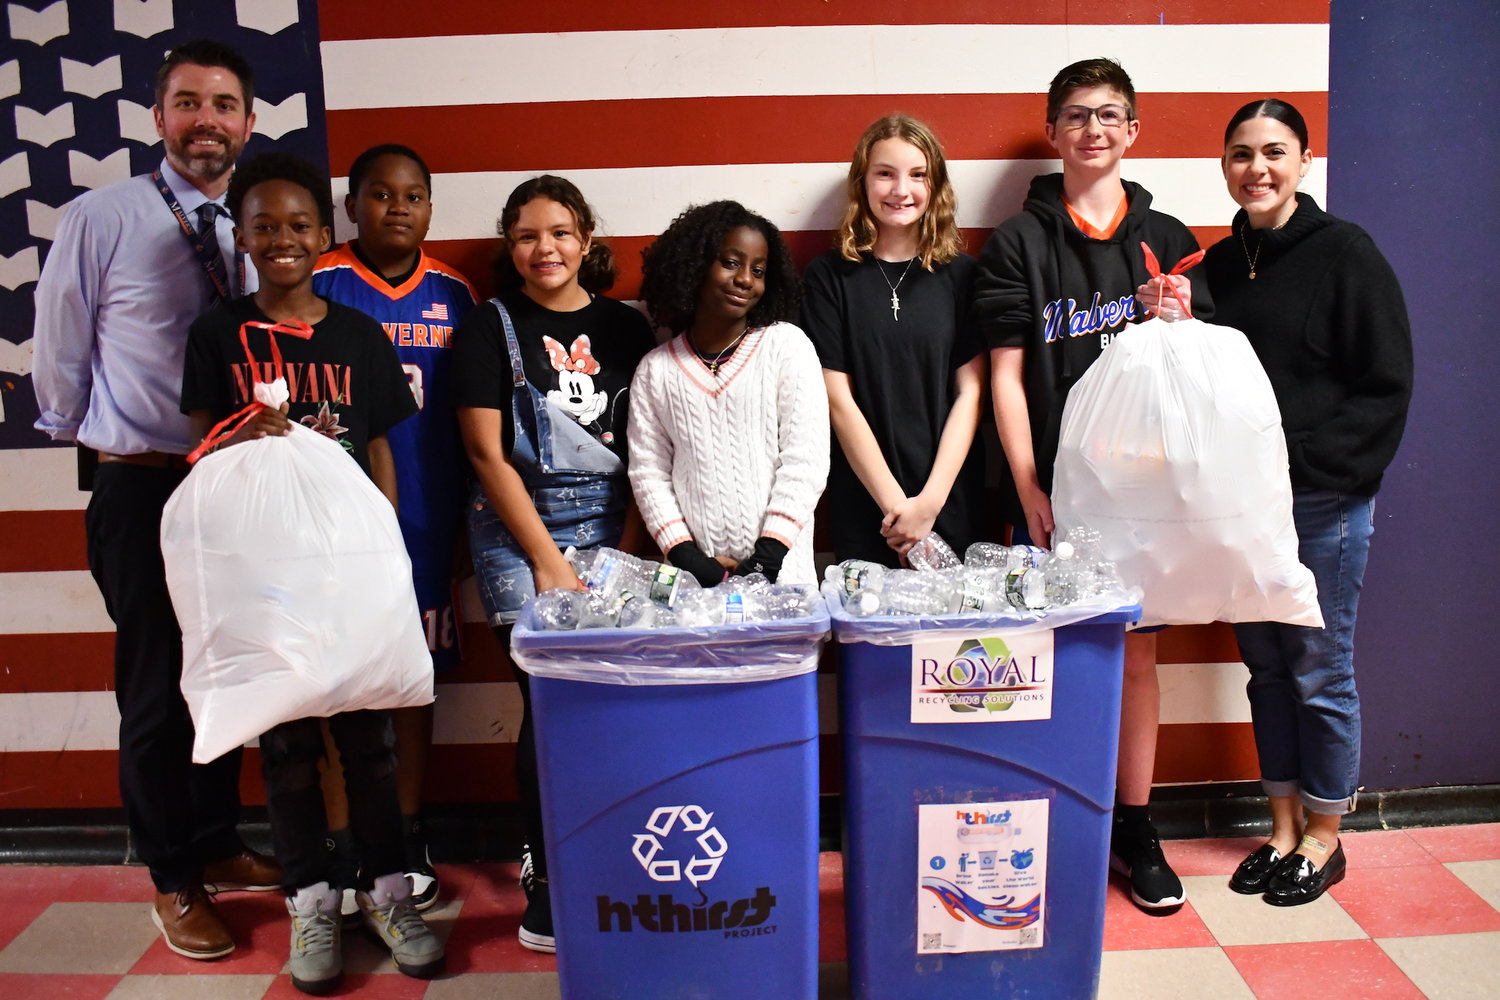 Howard T. Herber Middle School Assistant Principal James Miller with Thirst Project student ambassadors Samore Seraphin, Kamren Milliner, Angie Perez Bojorge, Jessica Williams, Ava Schachtel, Markus Daly and English and News Literacy teacher Ms. Acierno.